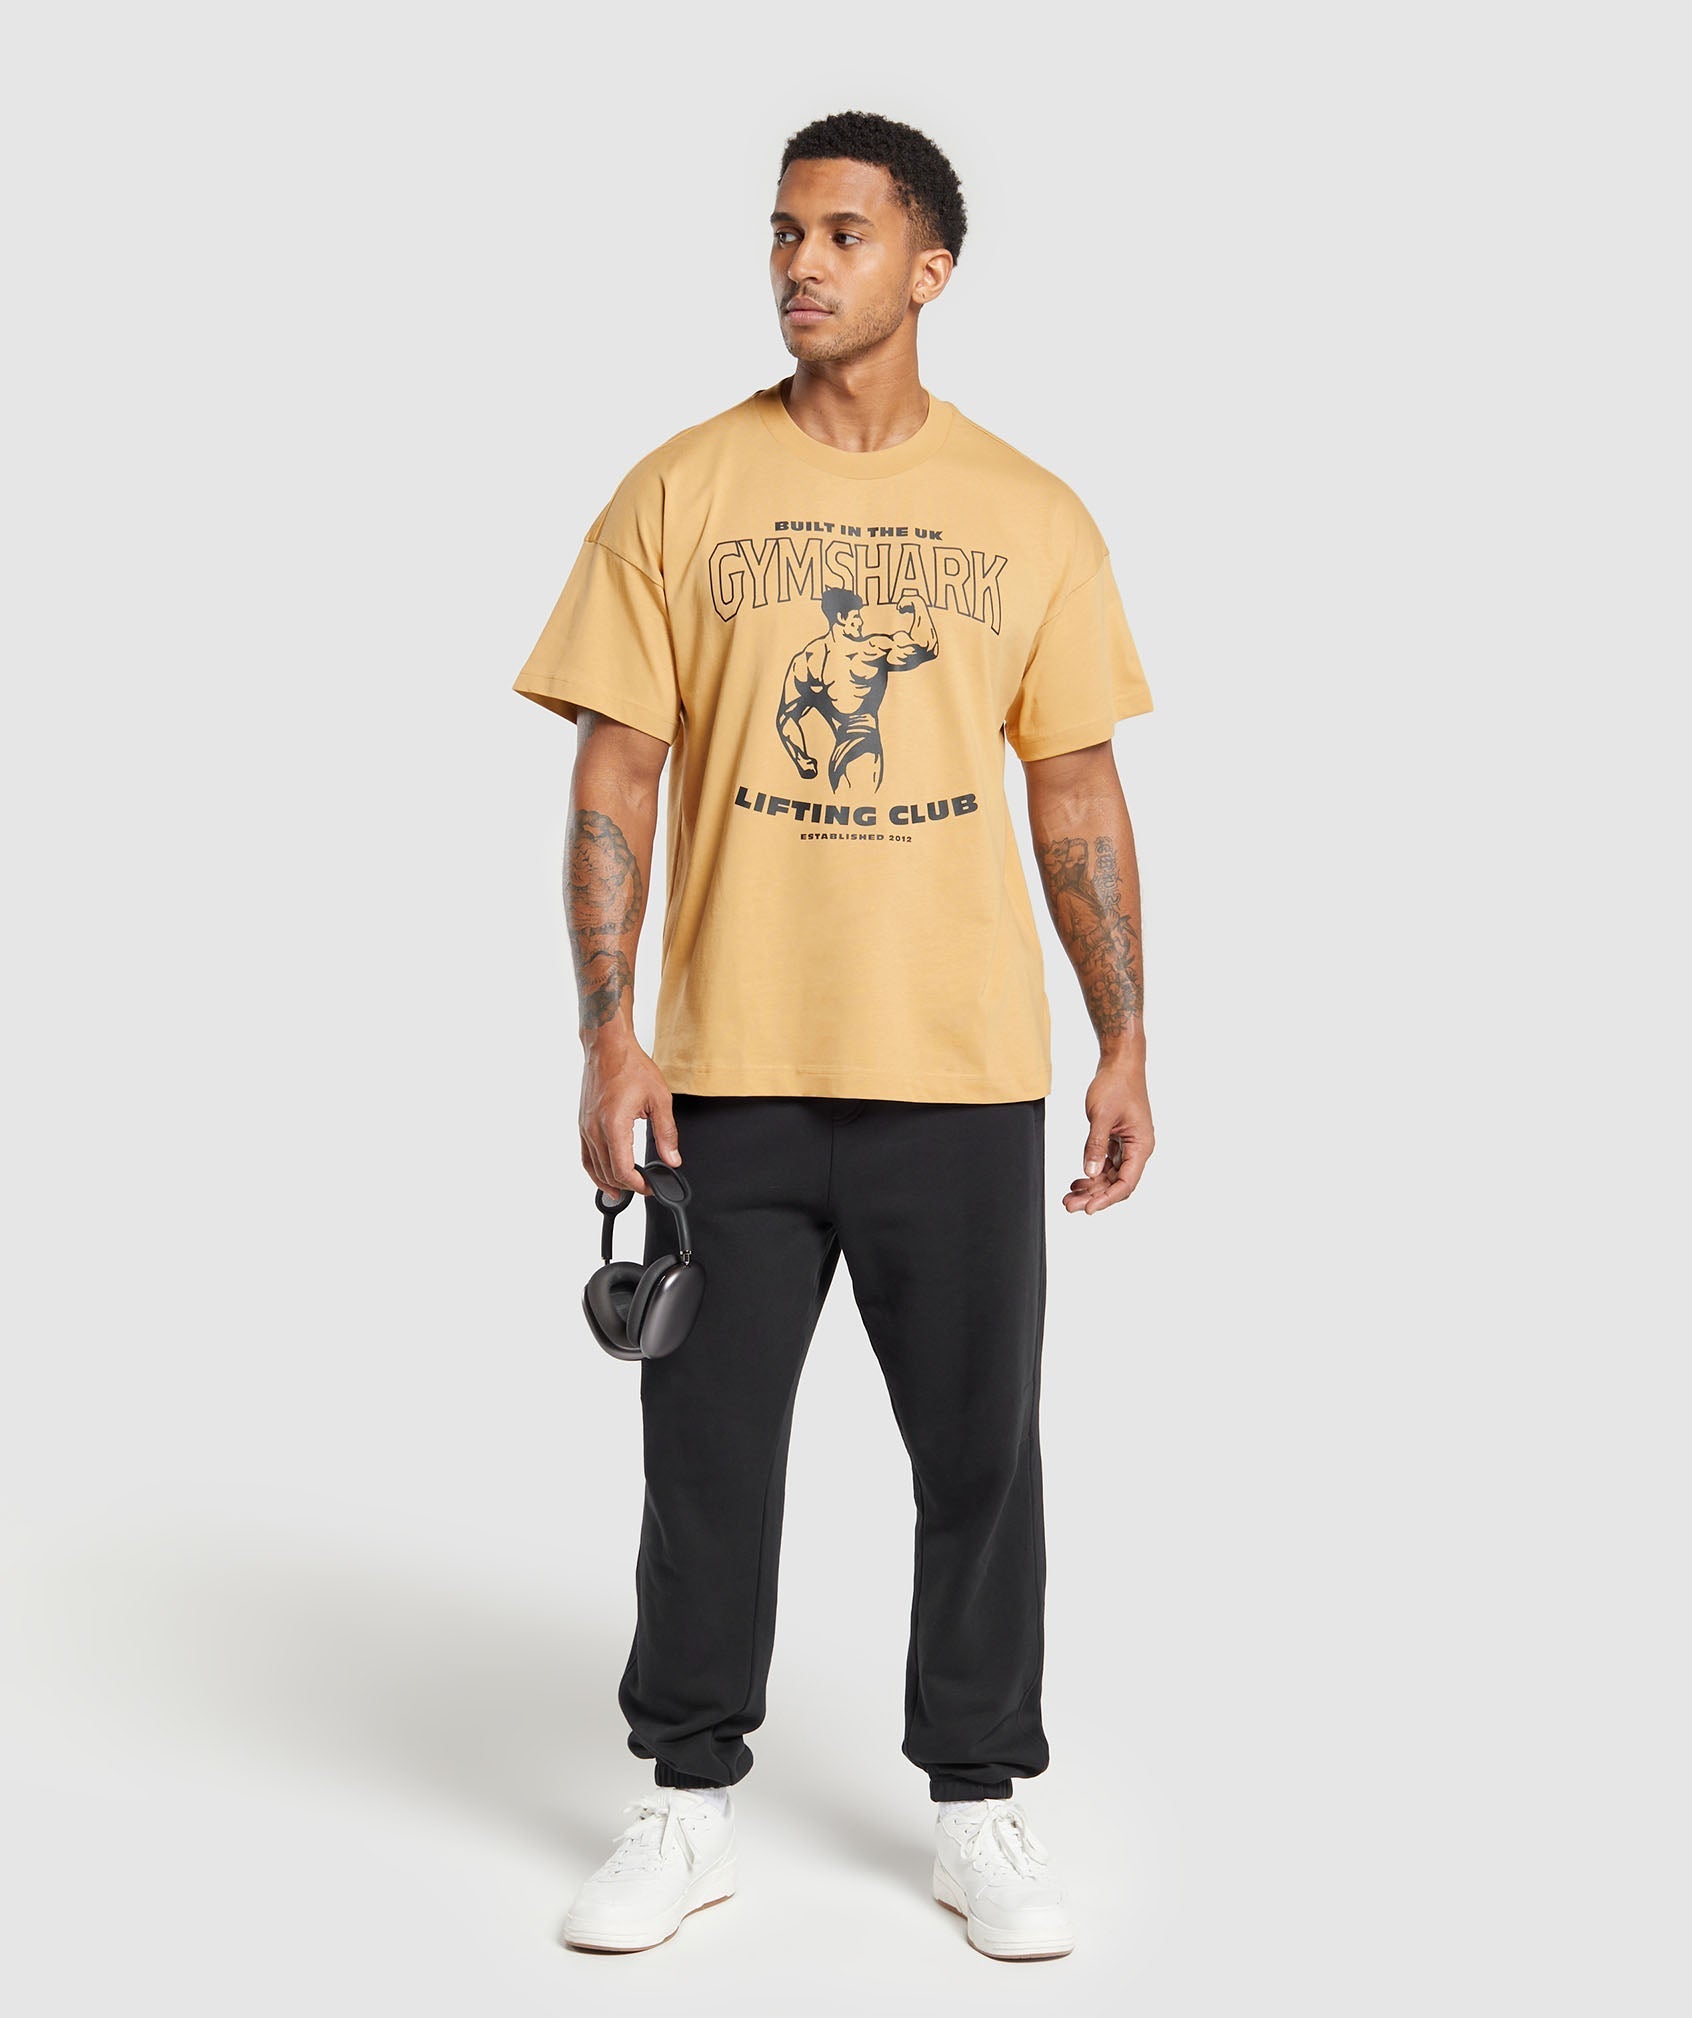 Built in the UK T-Shirt in Rustic Yellow - view 4